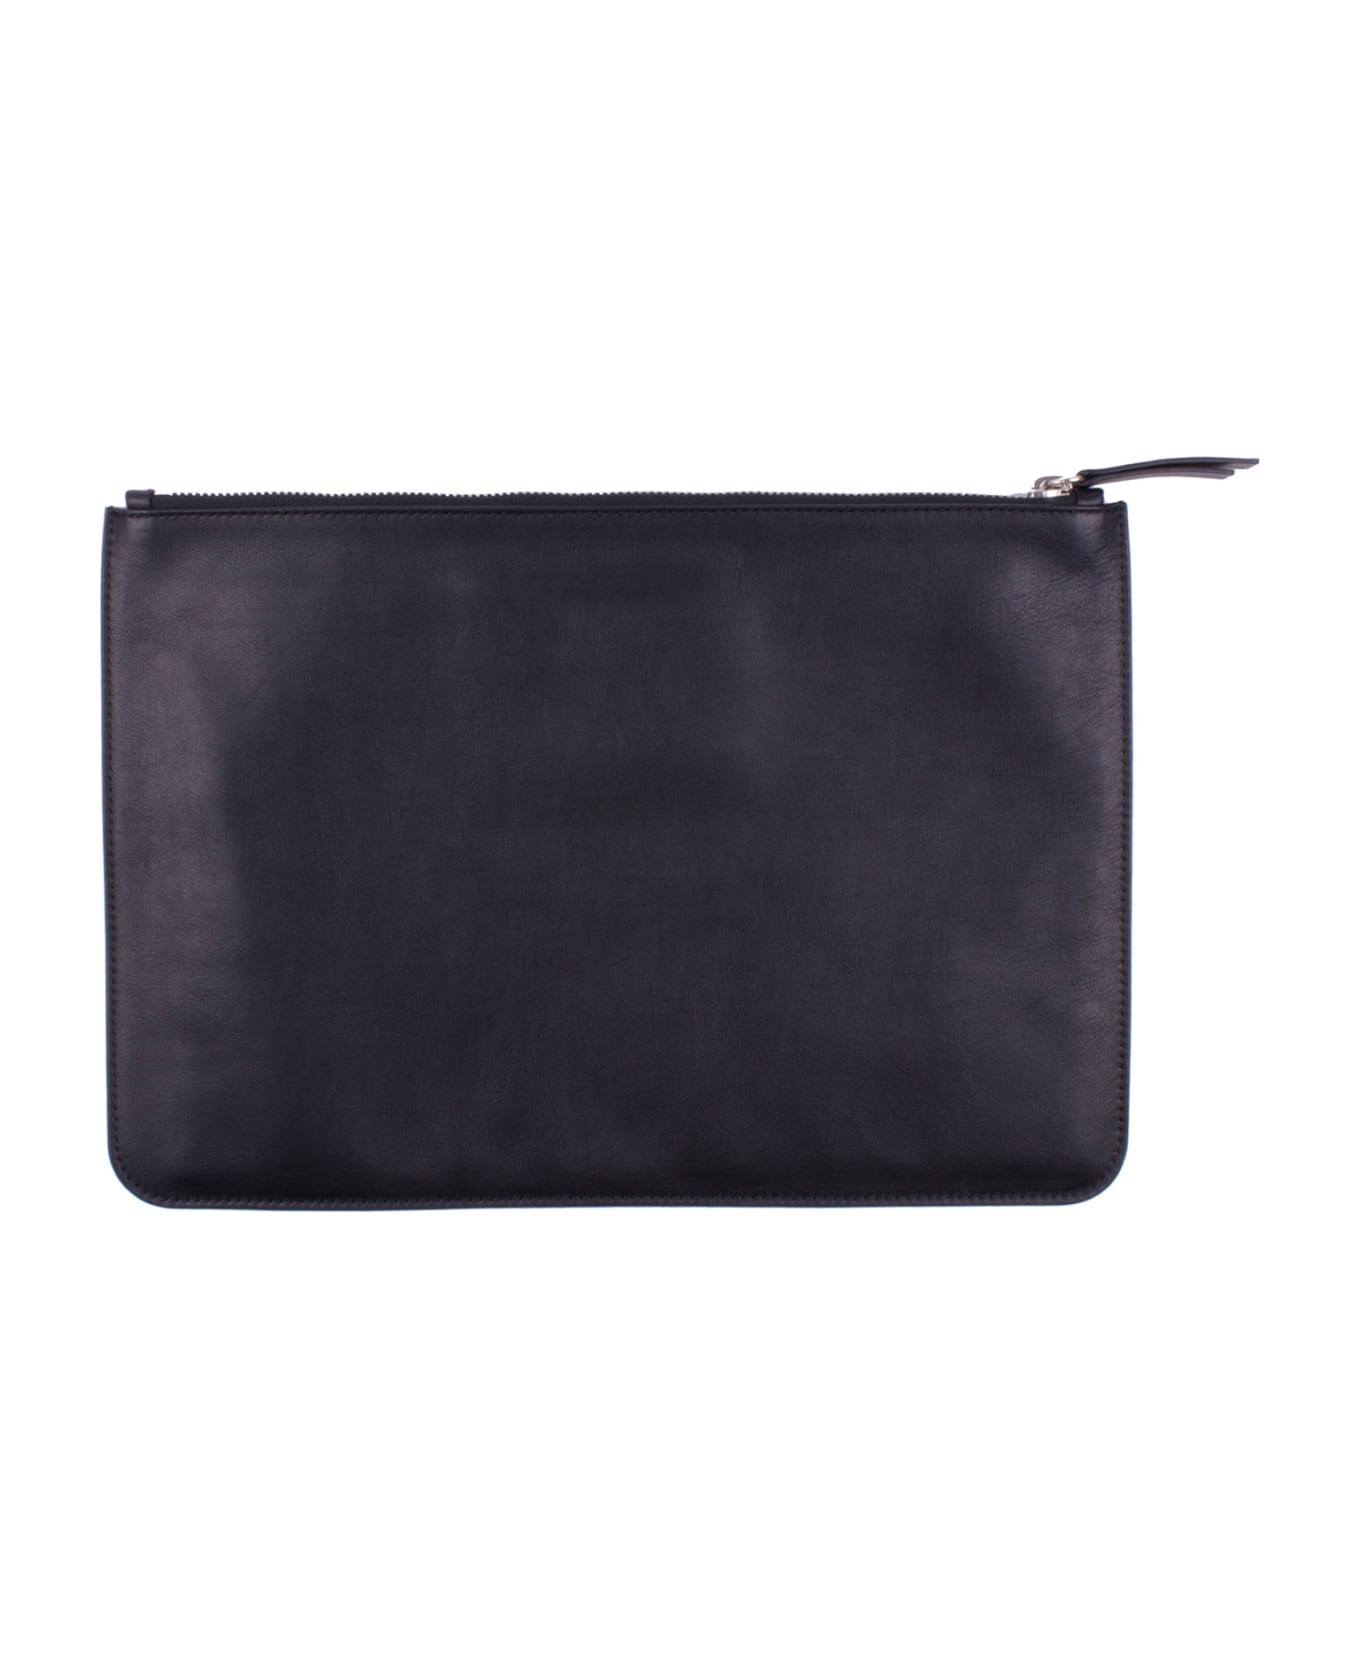 Orciani Leather Briefcases - Black